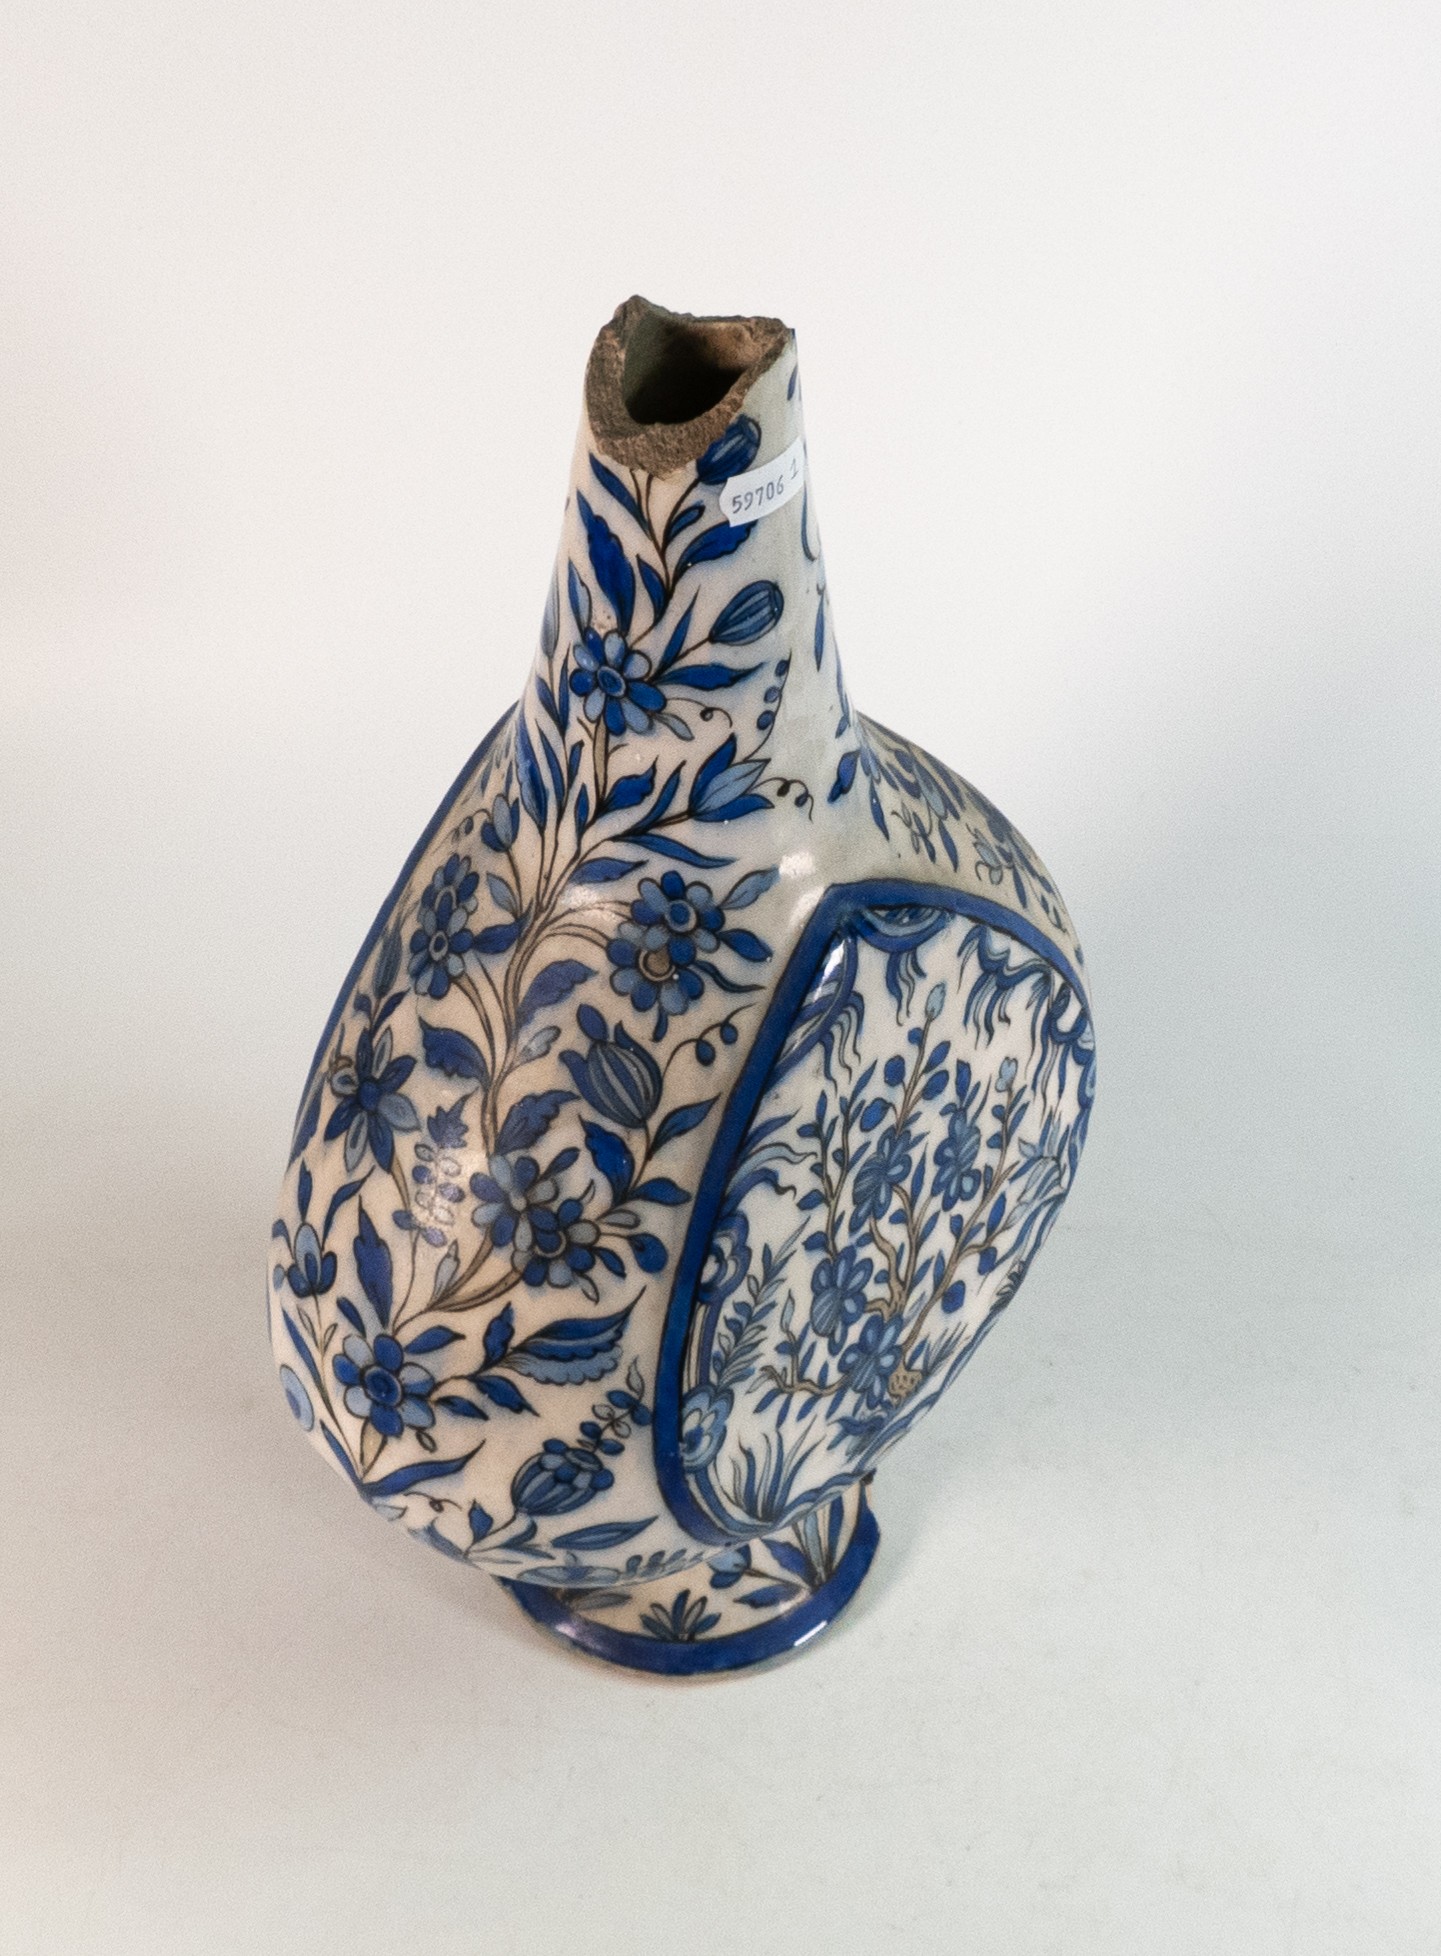 16th century Persian pottery vase. Floral and arboreal decoration in monochrome blue and grey - Bild 4 aus 7